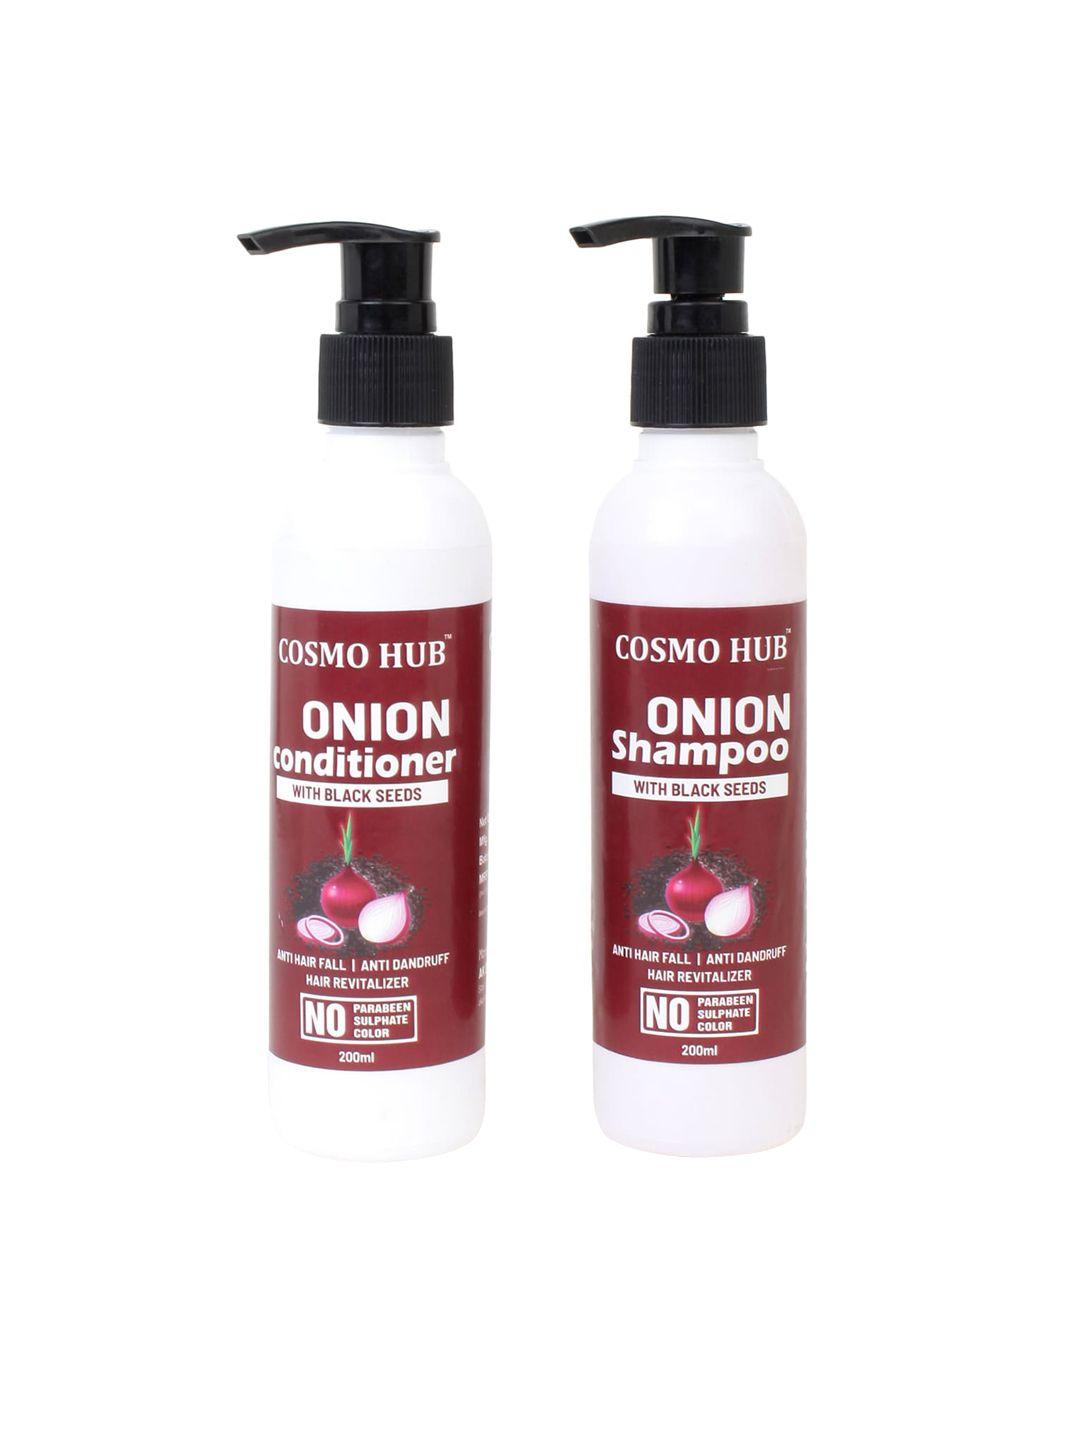 COSMO HUB Combo Of Onion Shampoo & Conditioner With Black Seeds - 200ml Each